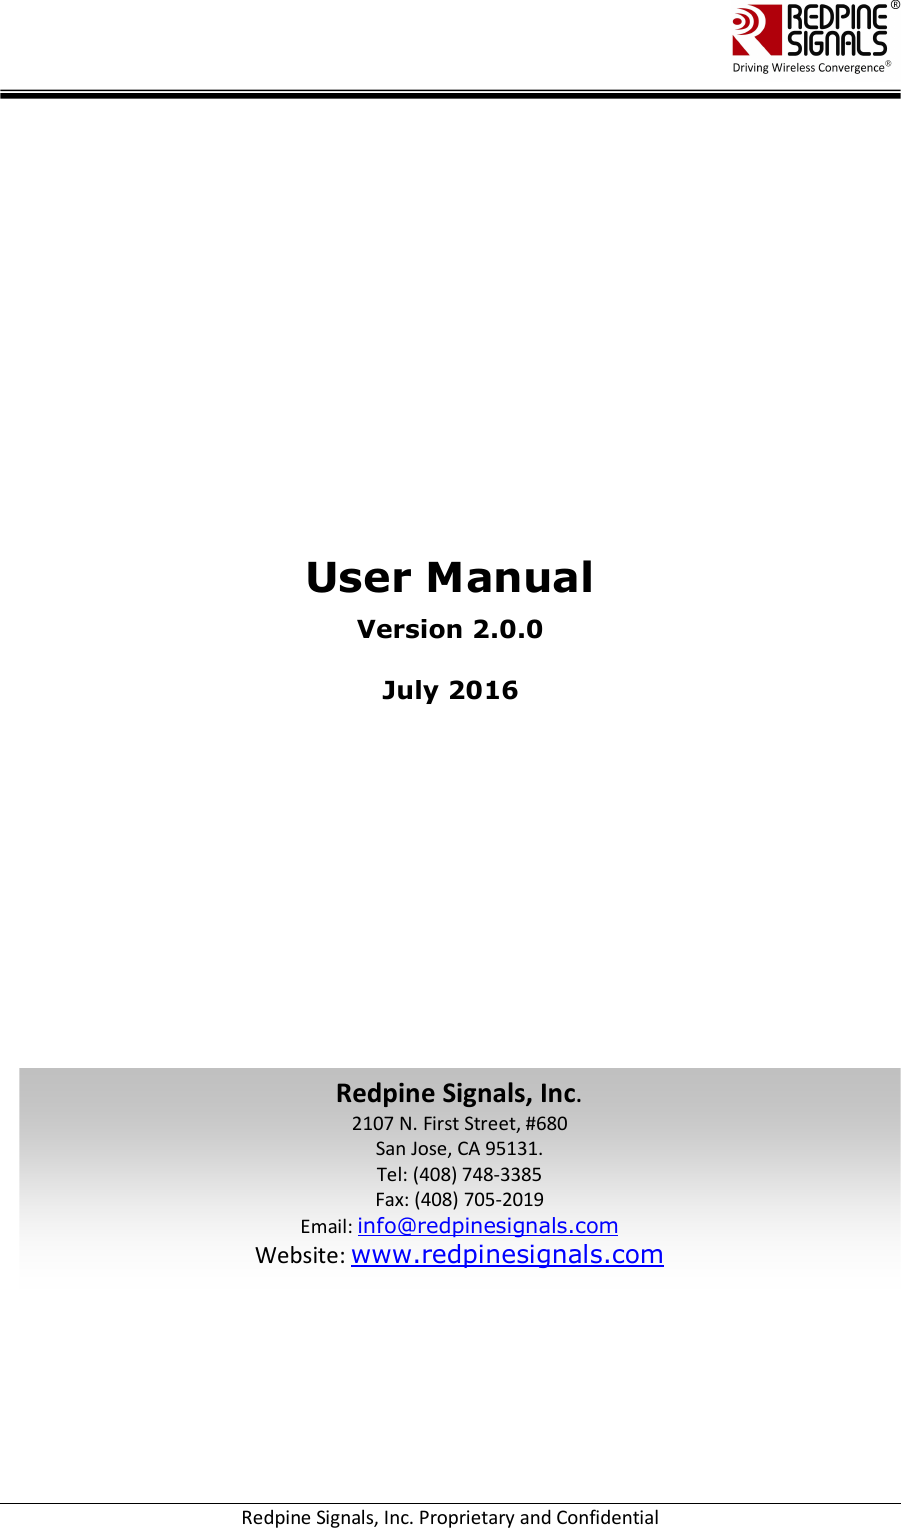    Redpine Signals, Inc. Proprietary and Confidential               User Manual Version 2.0.0  July 2016 Redpine Signals, Inc. 2107 N. First Street, #680 San Jose, CA 95131. Tel: (408) 748-3385 Fax: (408) 705-2019  Email: info@redpinesignals.com Website: www.redpinesignals.com 